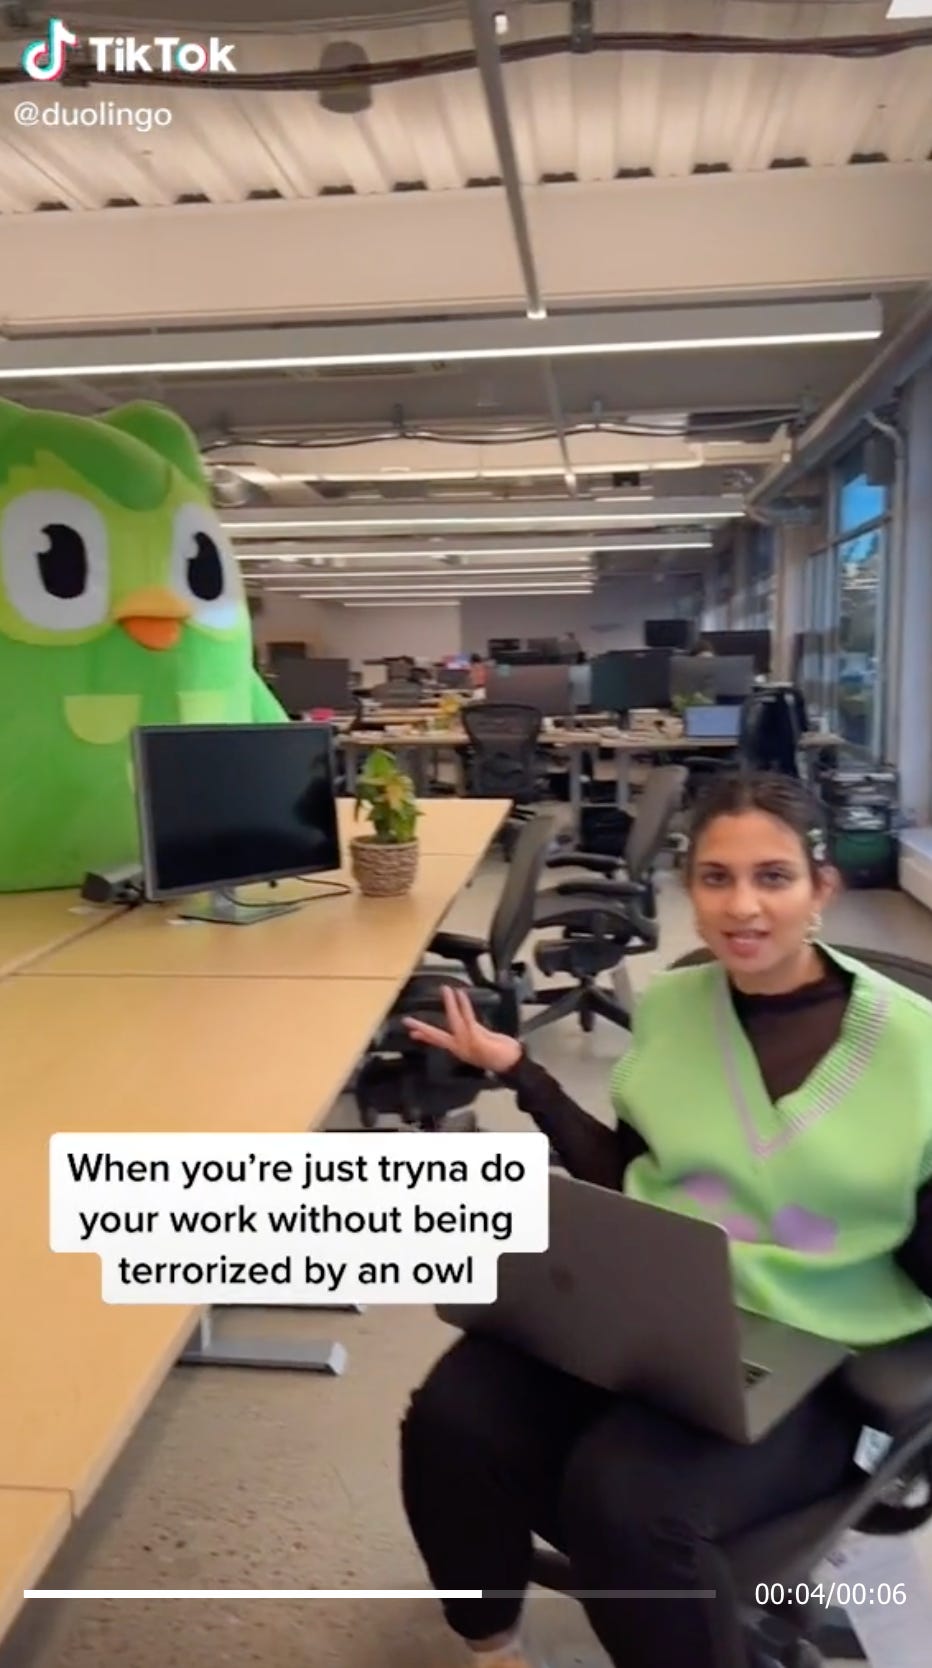 Screenshot of a TikTok video with a woman sitting in the foreground and a green owl costume in the background. Text on screen says "When you're just tryna do your work without being terrorized by an owl."